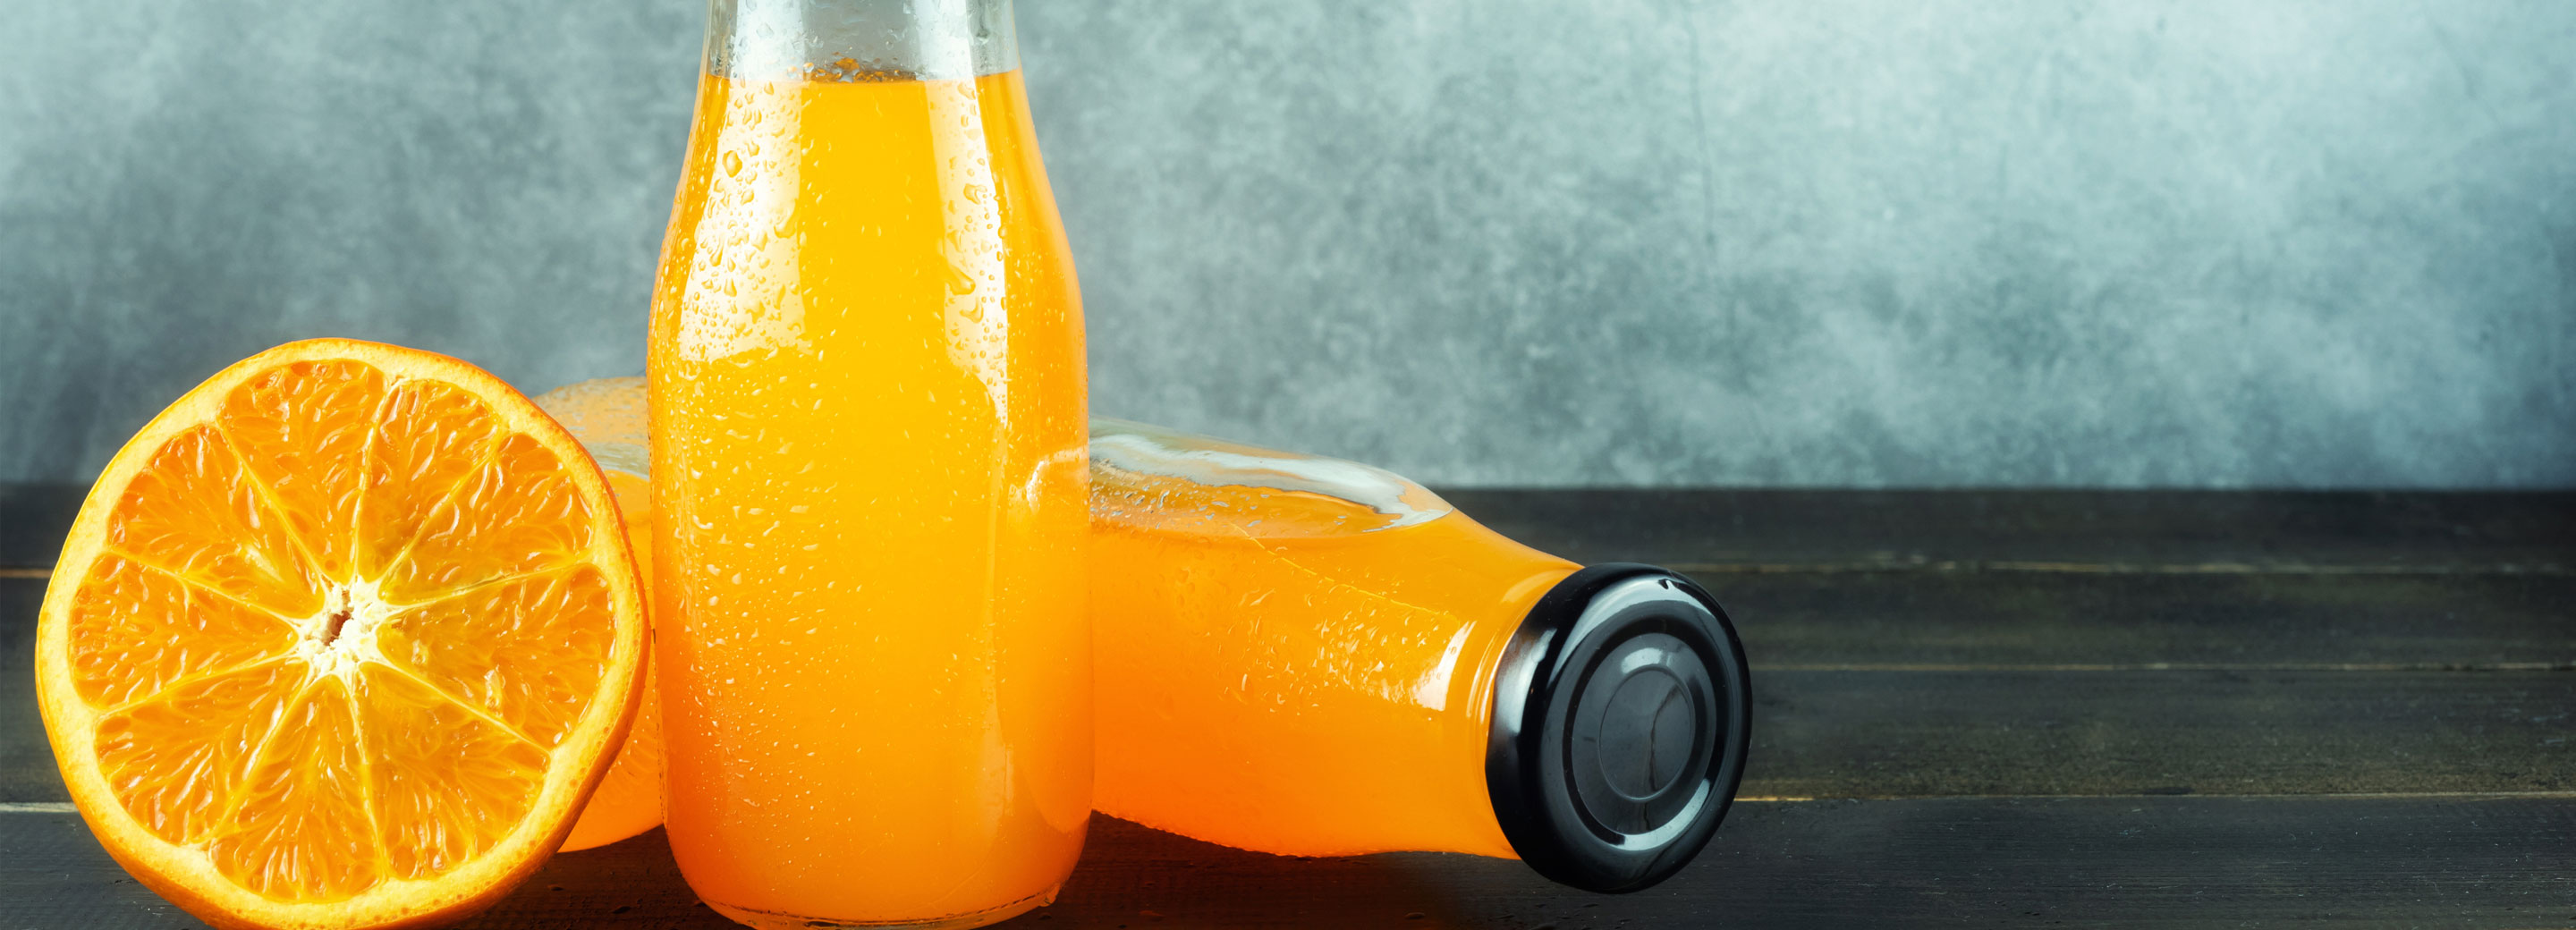 Is fruit juice taxable? Find out if there is a sales tax on fruit juice/sugary drinks. 